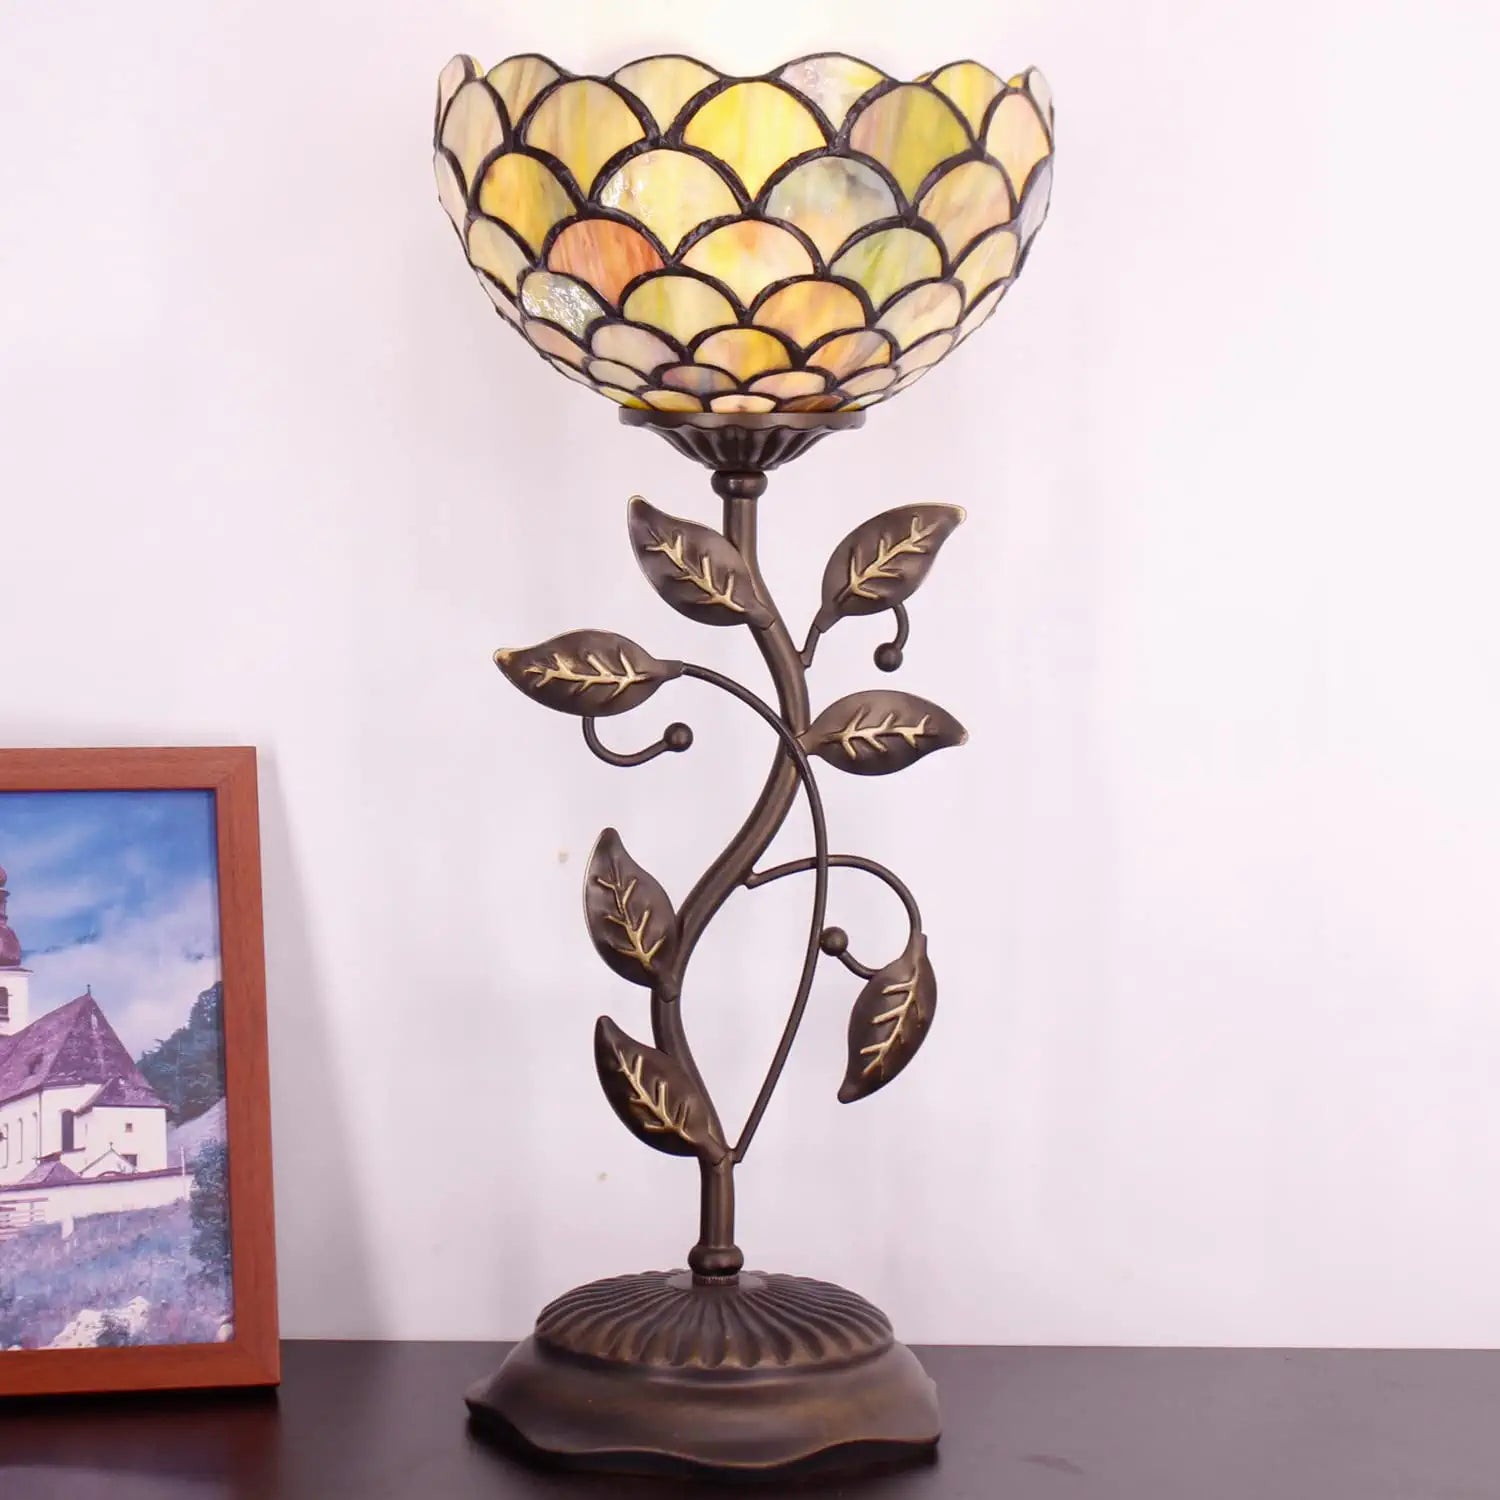 WERFACTORY Small Tiffany Table Lamp 8" Stained Glass Fish Scales Style Shade 19" Tall Antique Vintage Metal Leaf Base Mini Bedside Accent Desk Torchiere Uplight